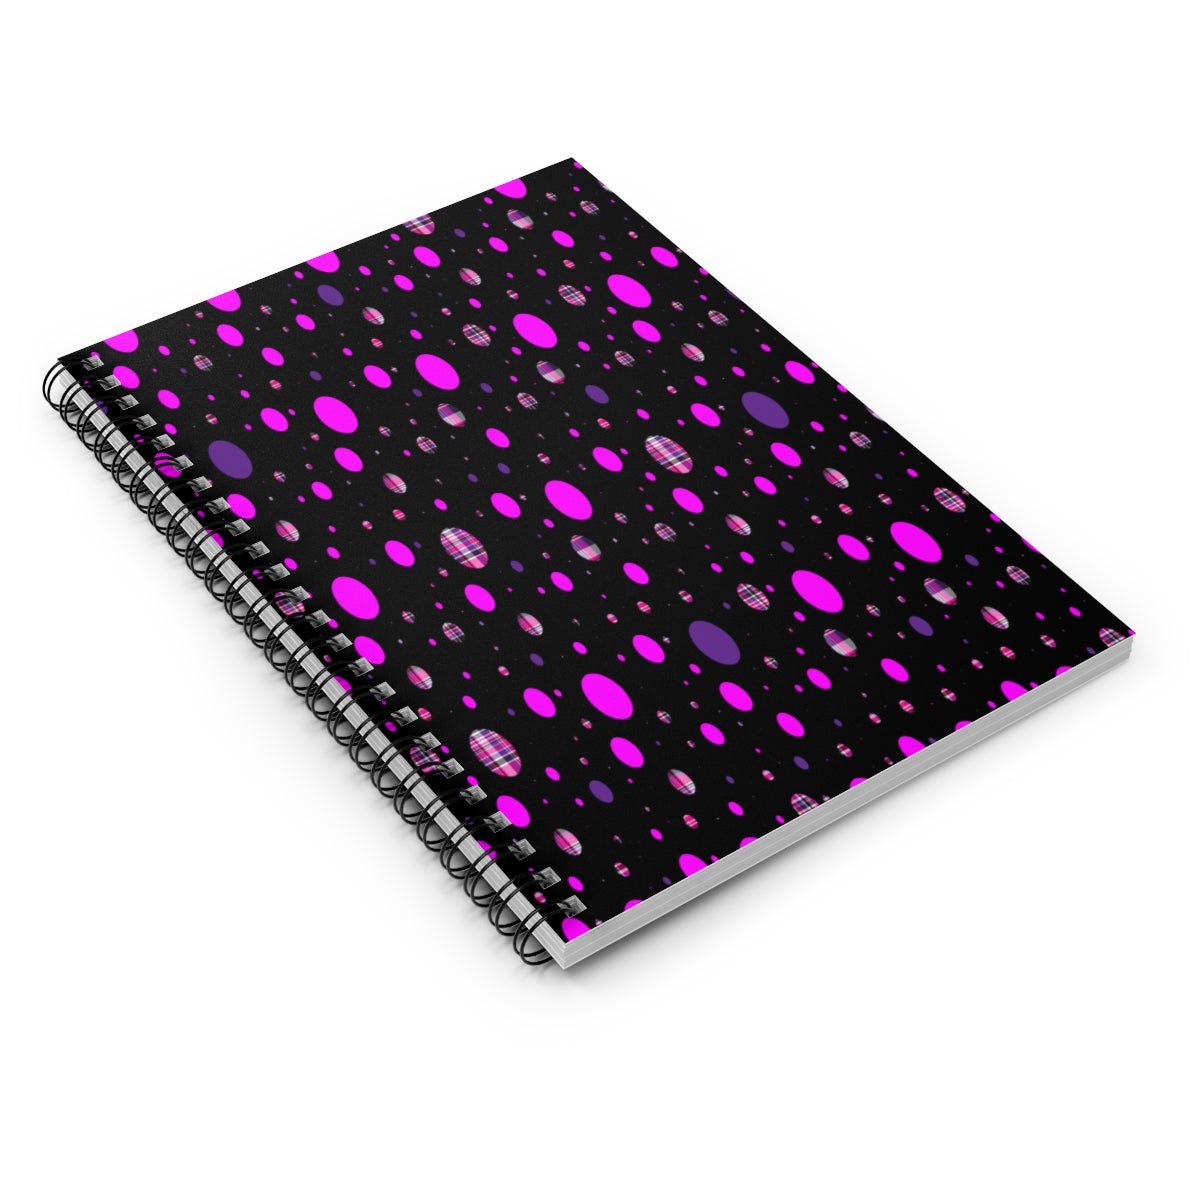 Pink and Purple Plaid Holes Polka Dots Spiral Ruled Line Notebook